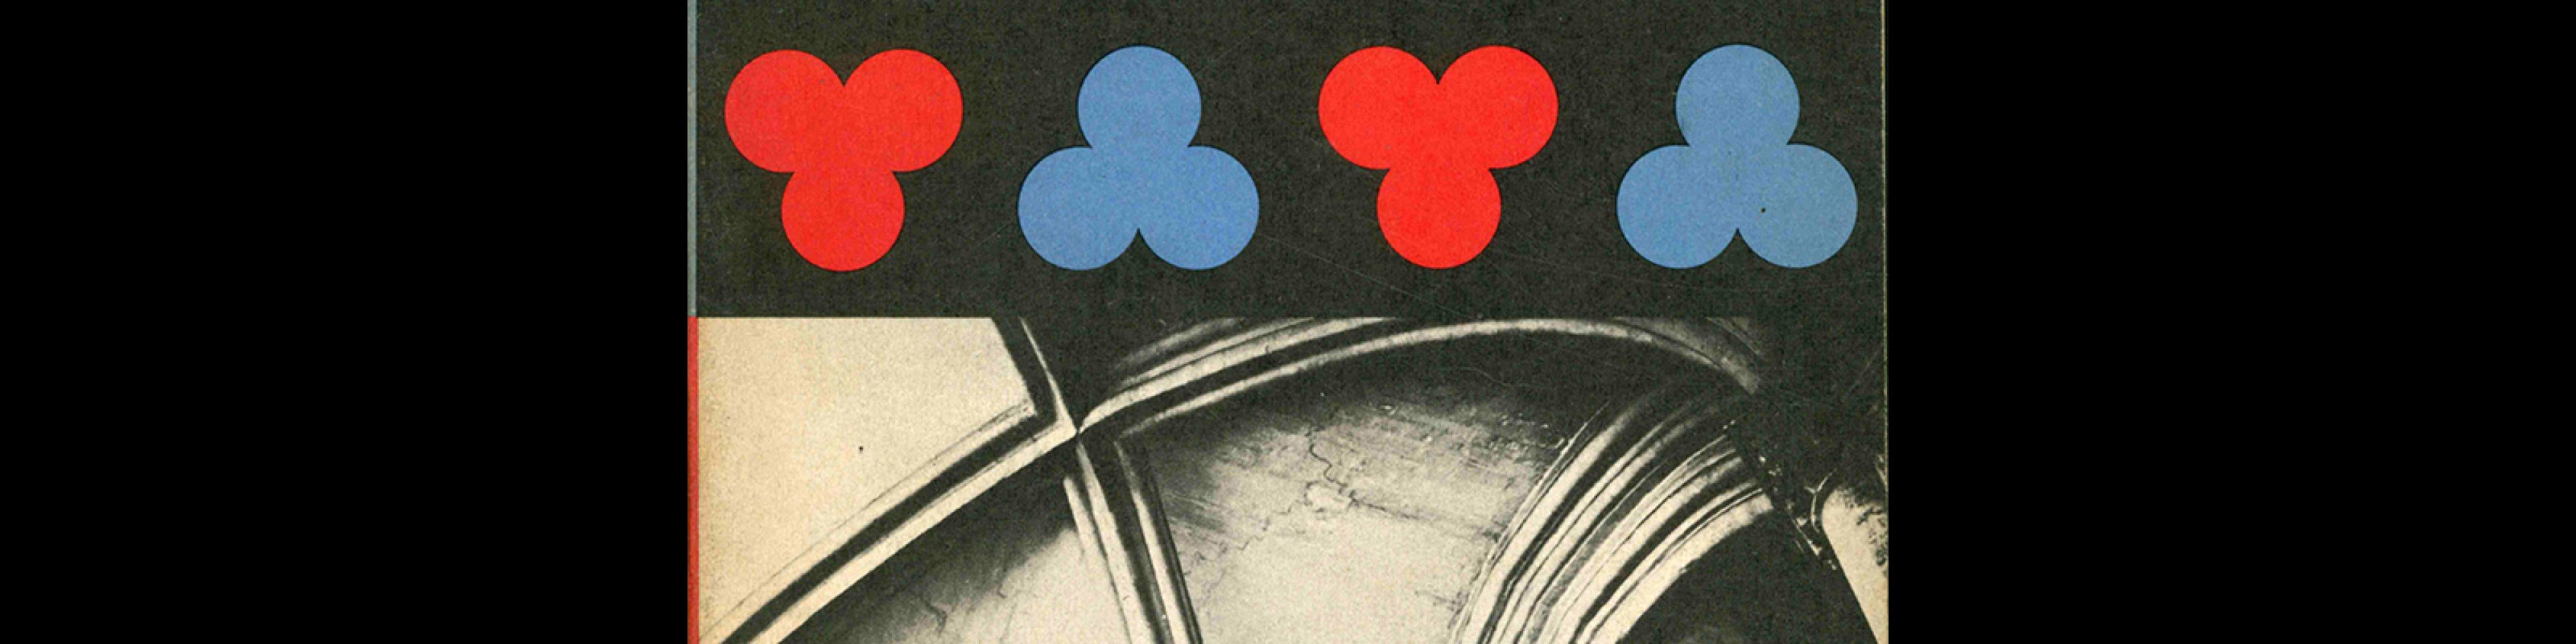 The Gothic Cathedral, Otto von Simson, 1964. Cover design by Paul Rand